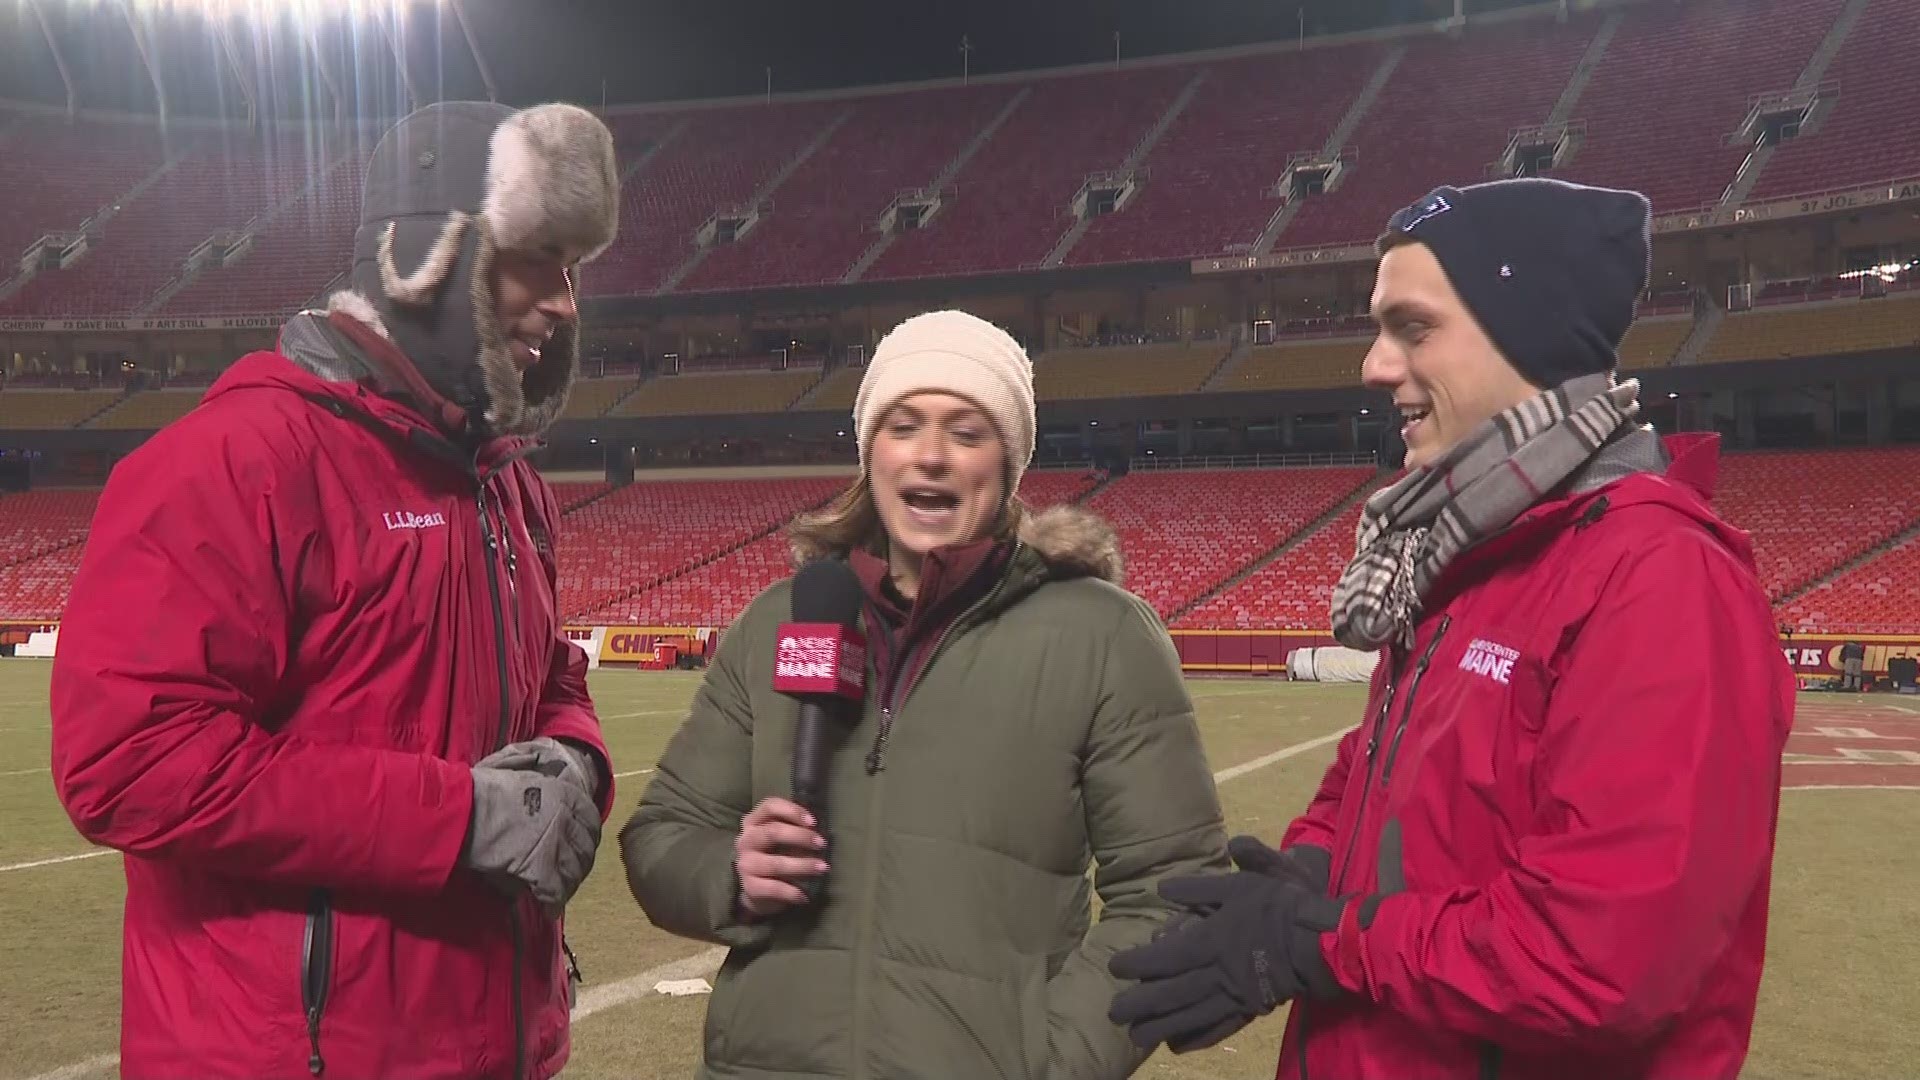 Jess, Chris and Zach spoke with the Patriots after their 37-31 win over the Chiefs in the AFC Championship